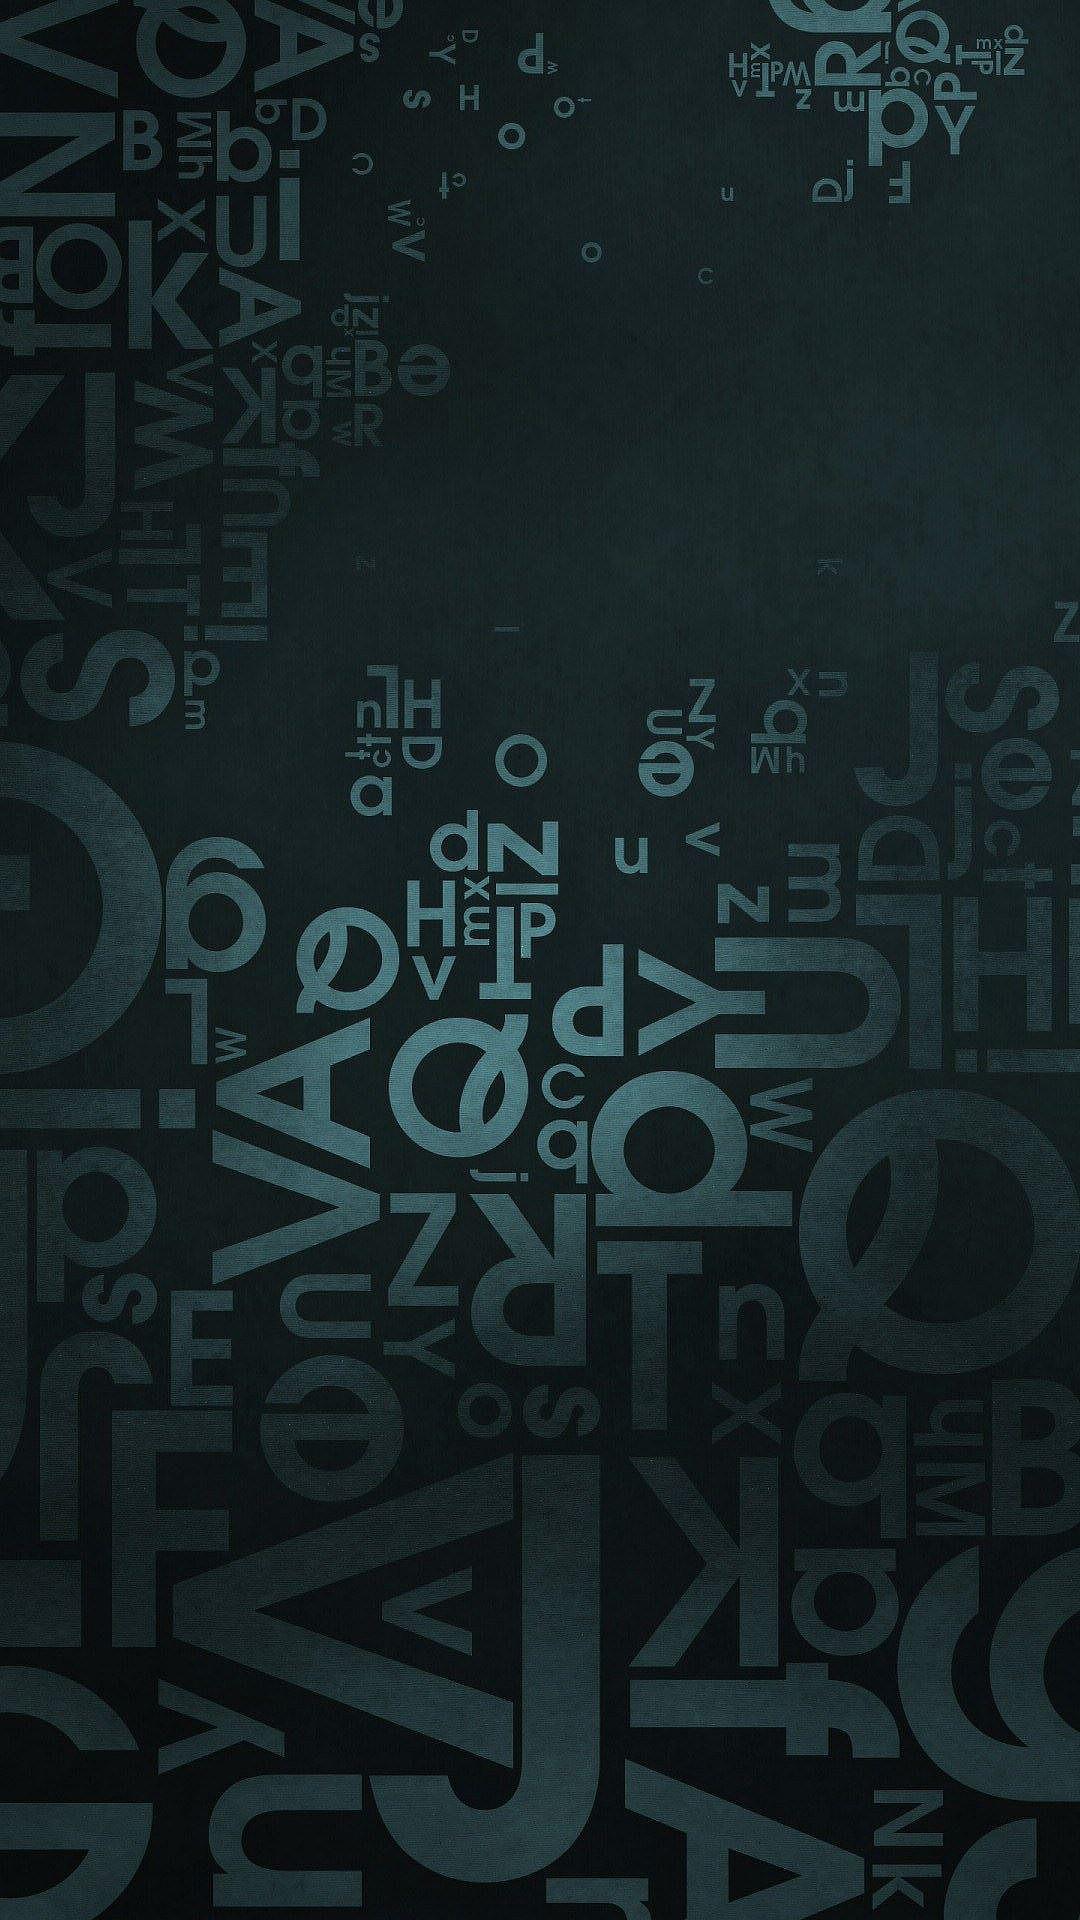 Typography htc one wallpaper, free and easy to download